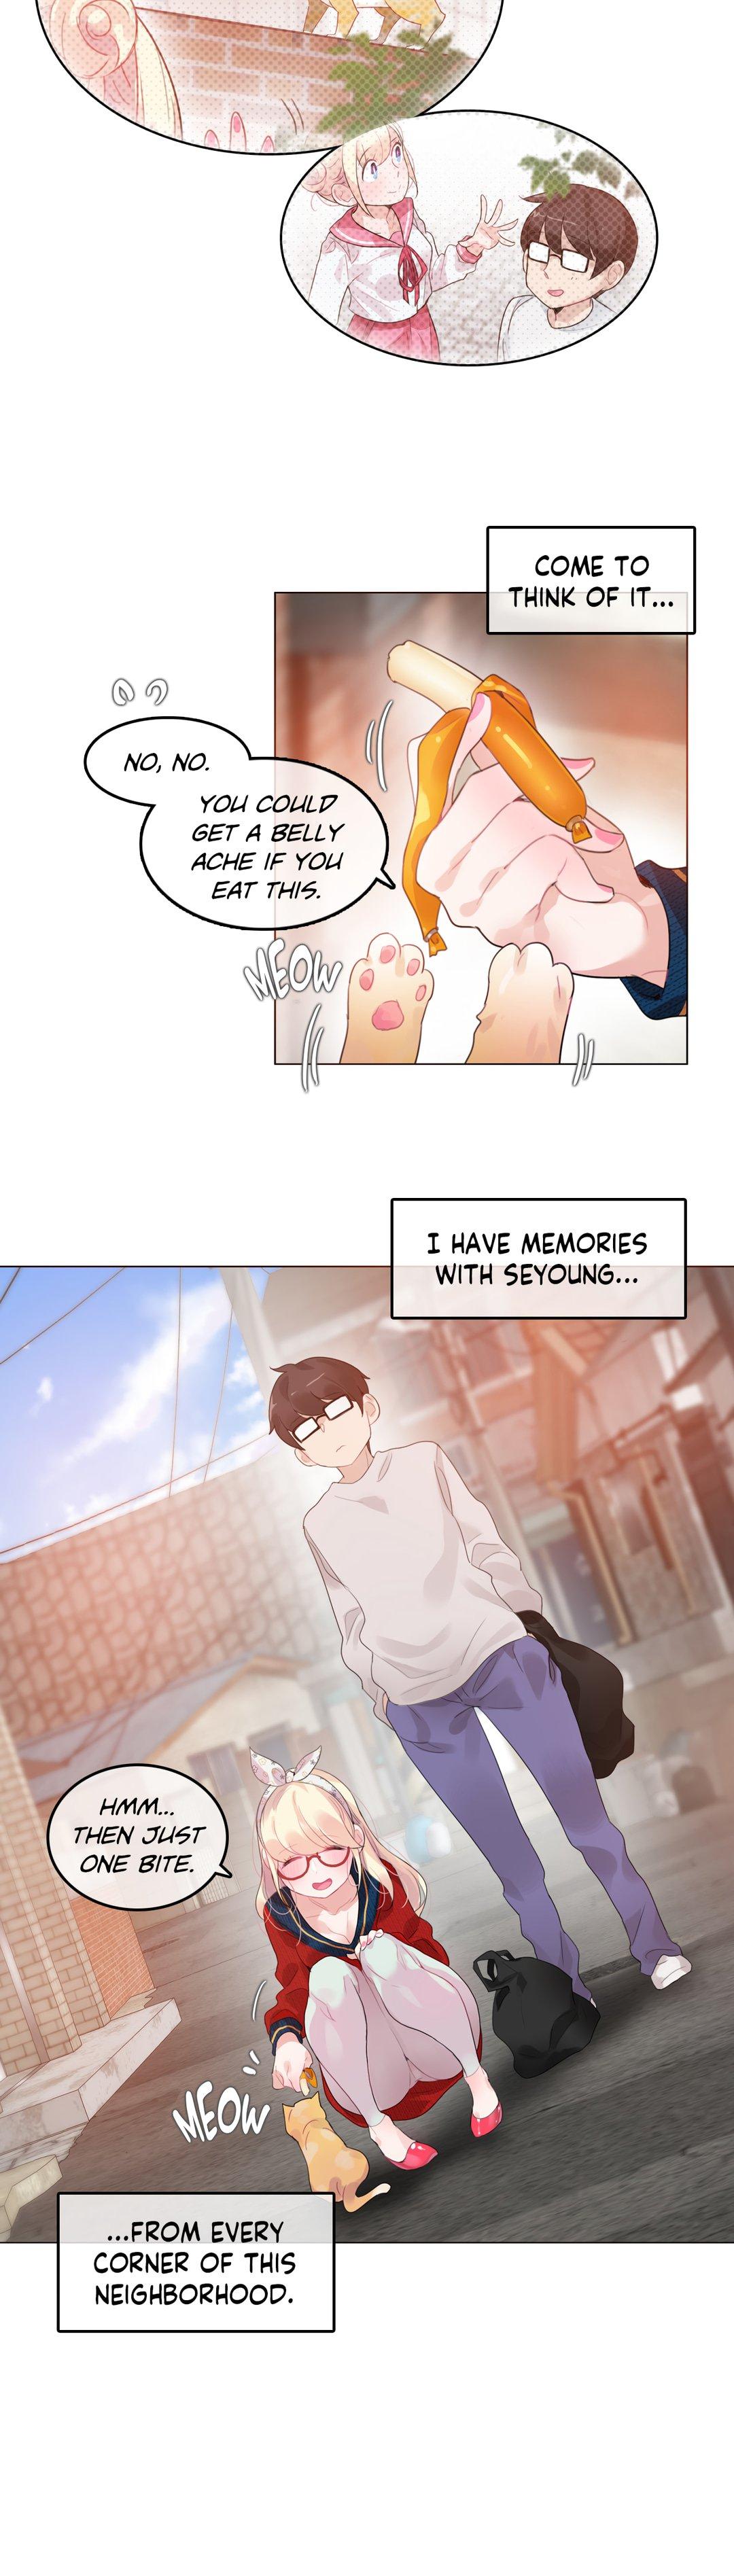 A Pervert's Daily Life • Chapter 51-55 74